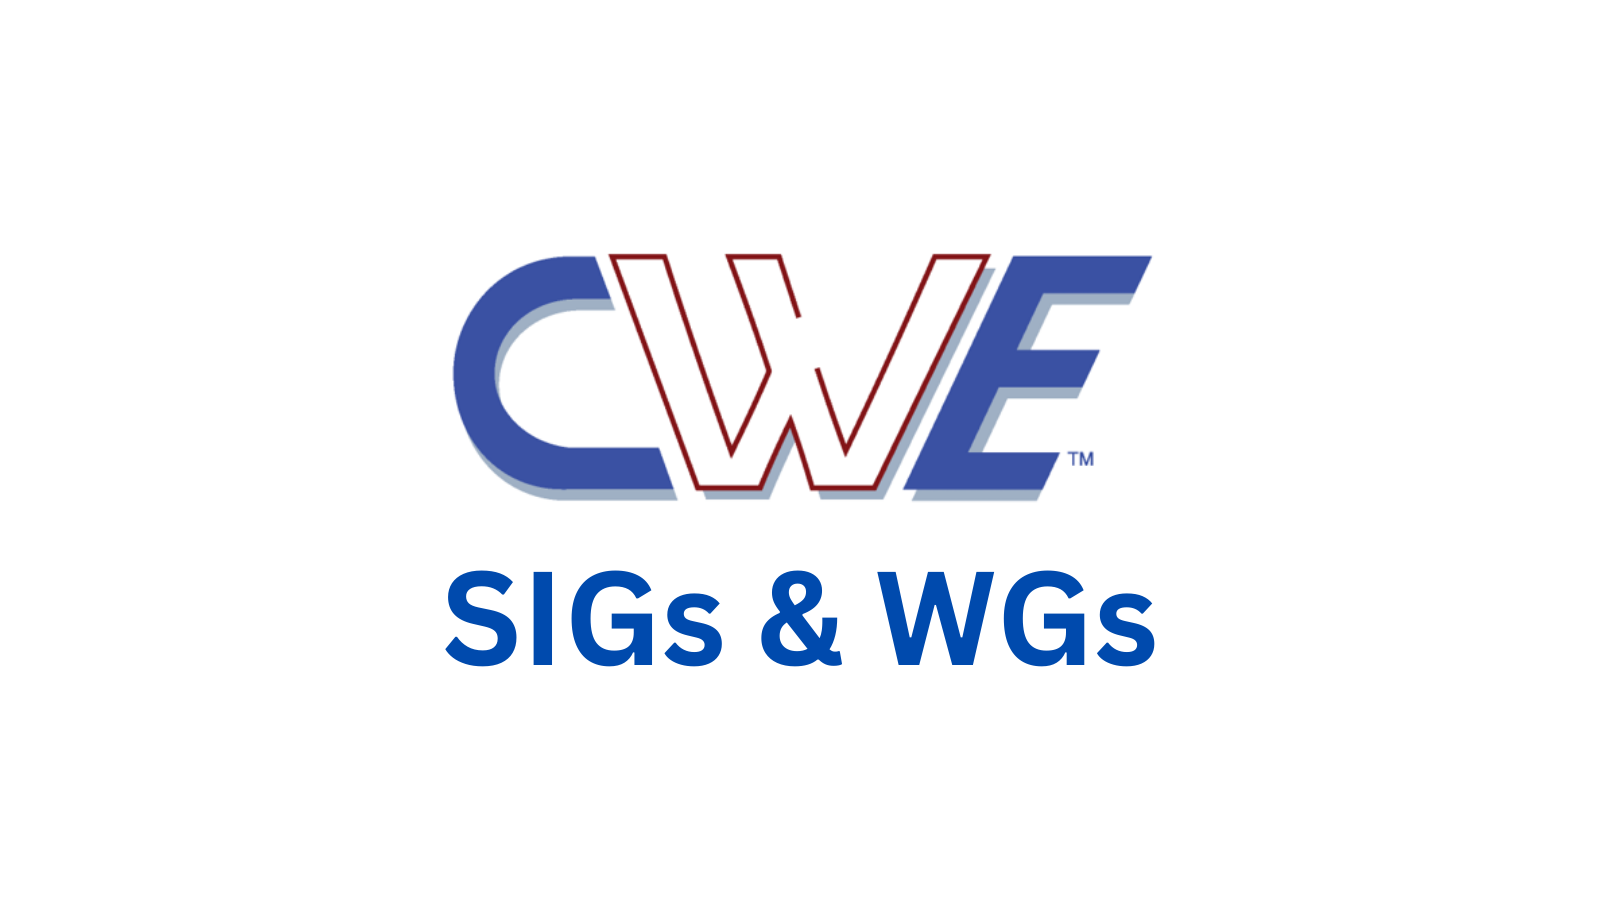 CWE/CAPEC SIGs & WGs